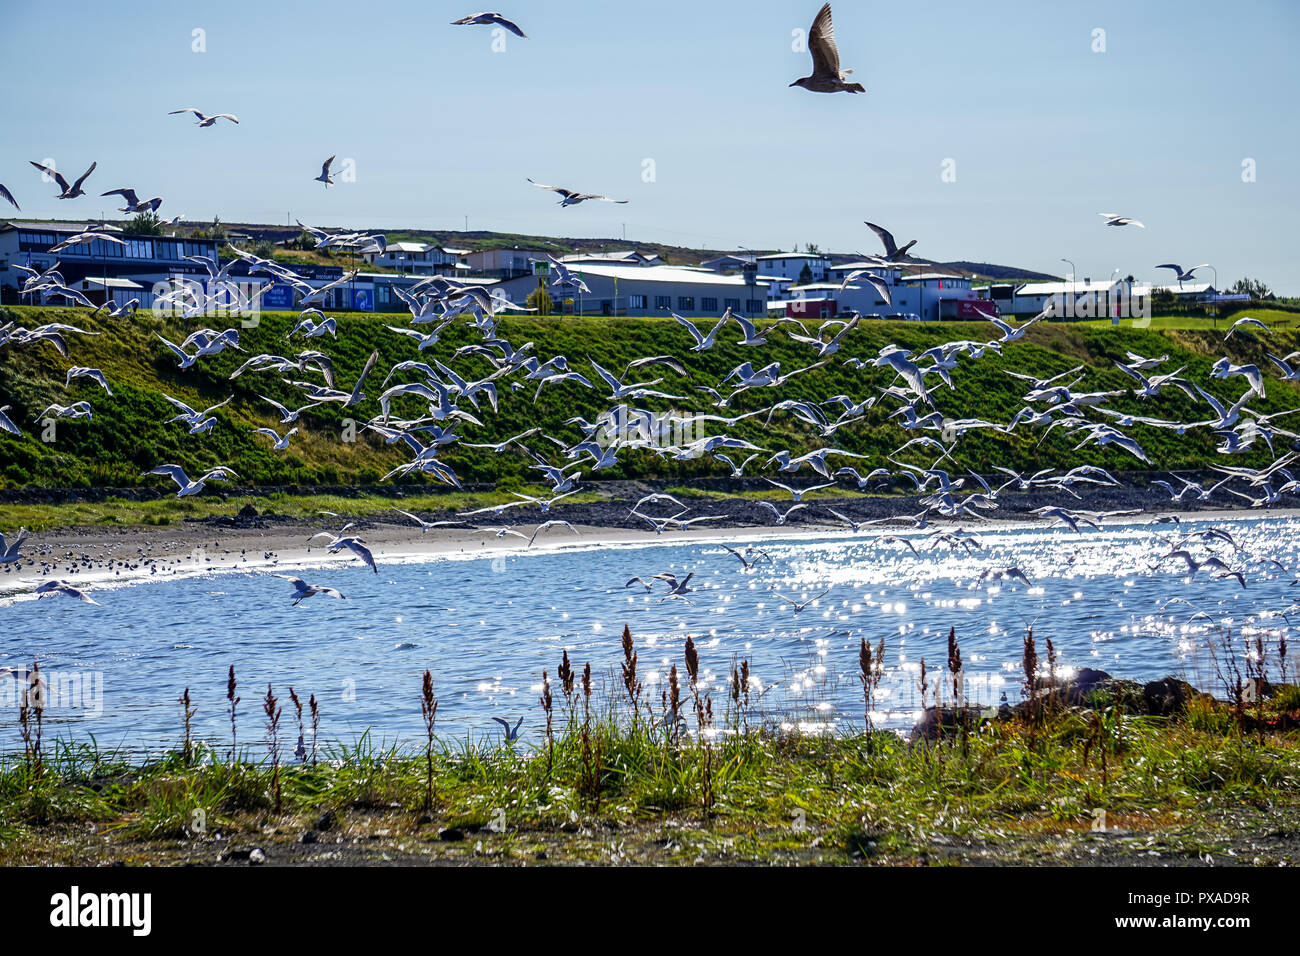 Hungry seagulls fightling for the fish - Husavik Stock Photo